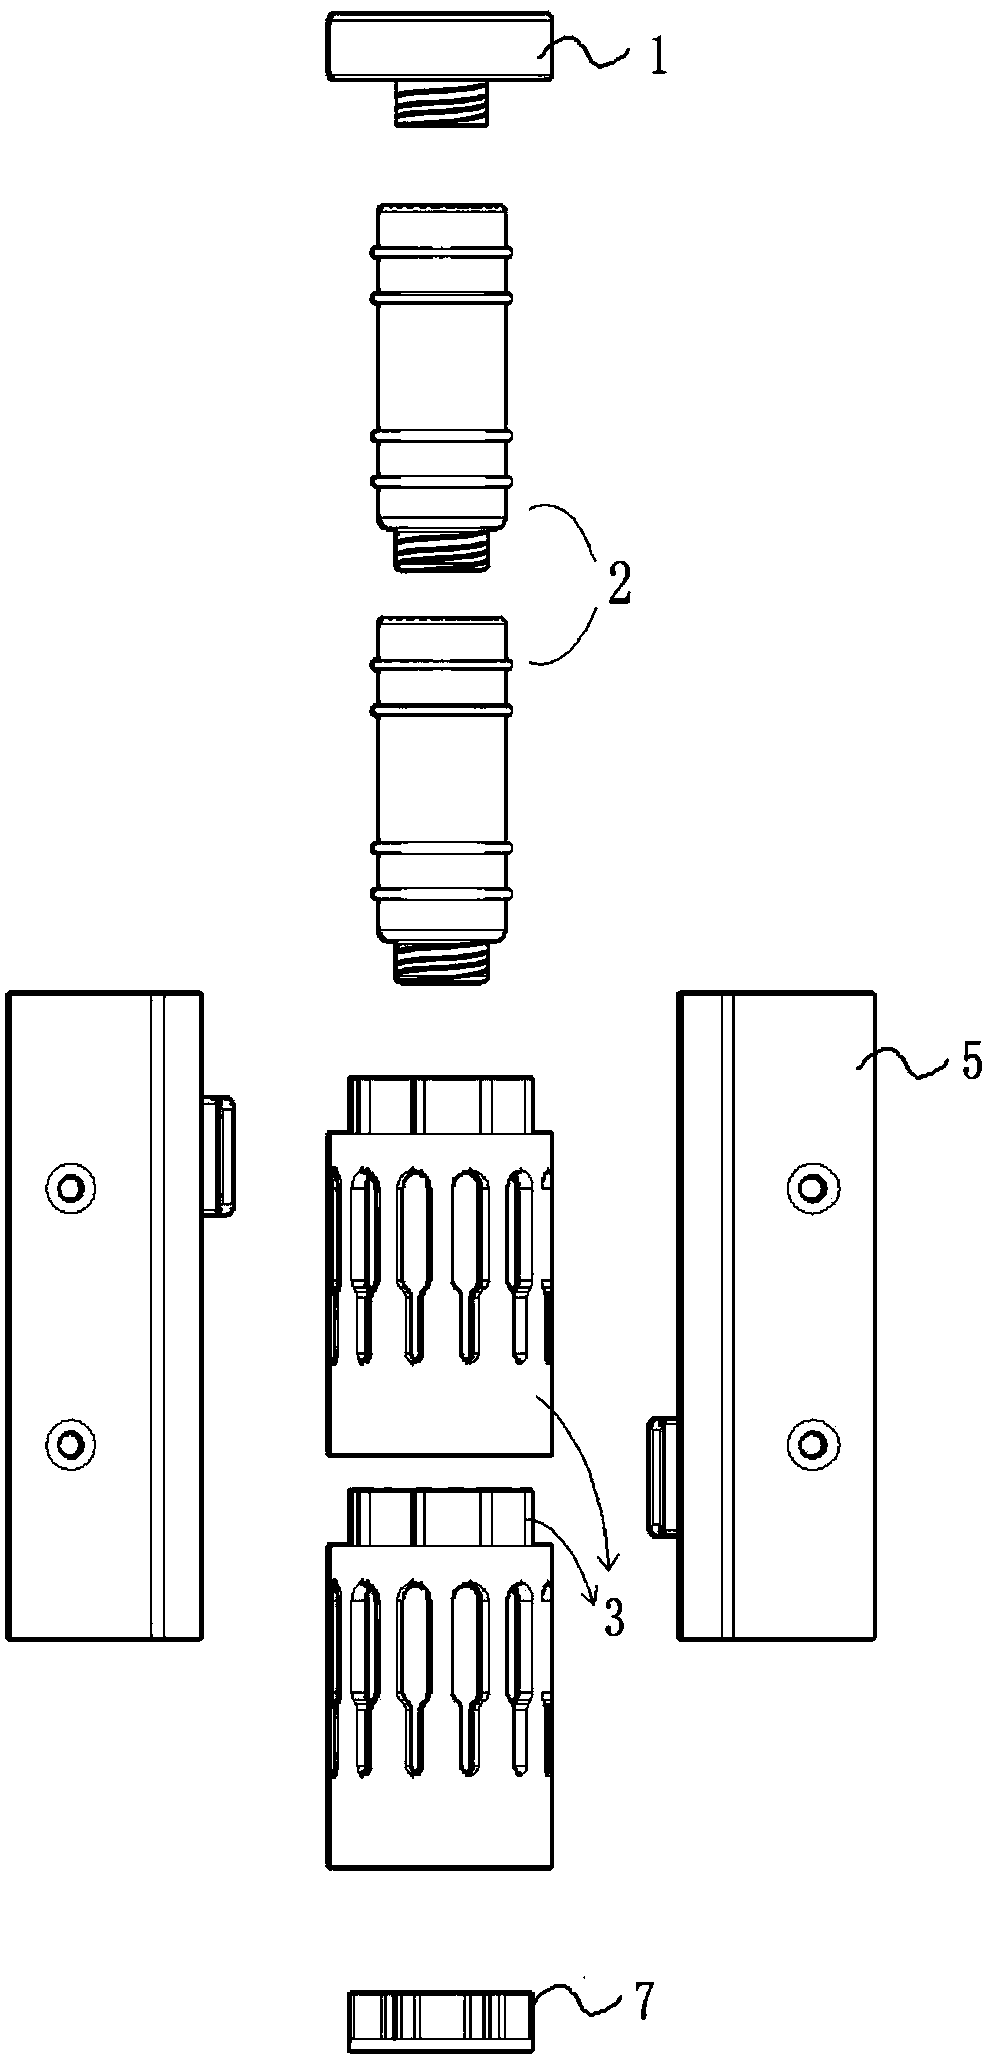 Modularized combined box body and connecting component thereof